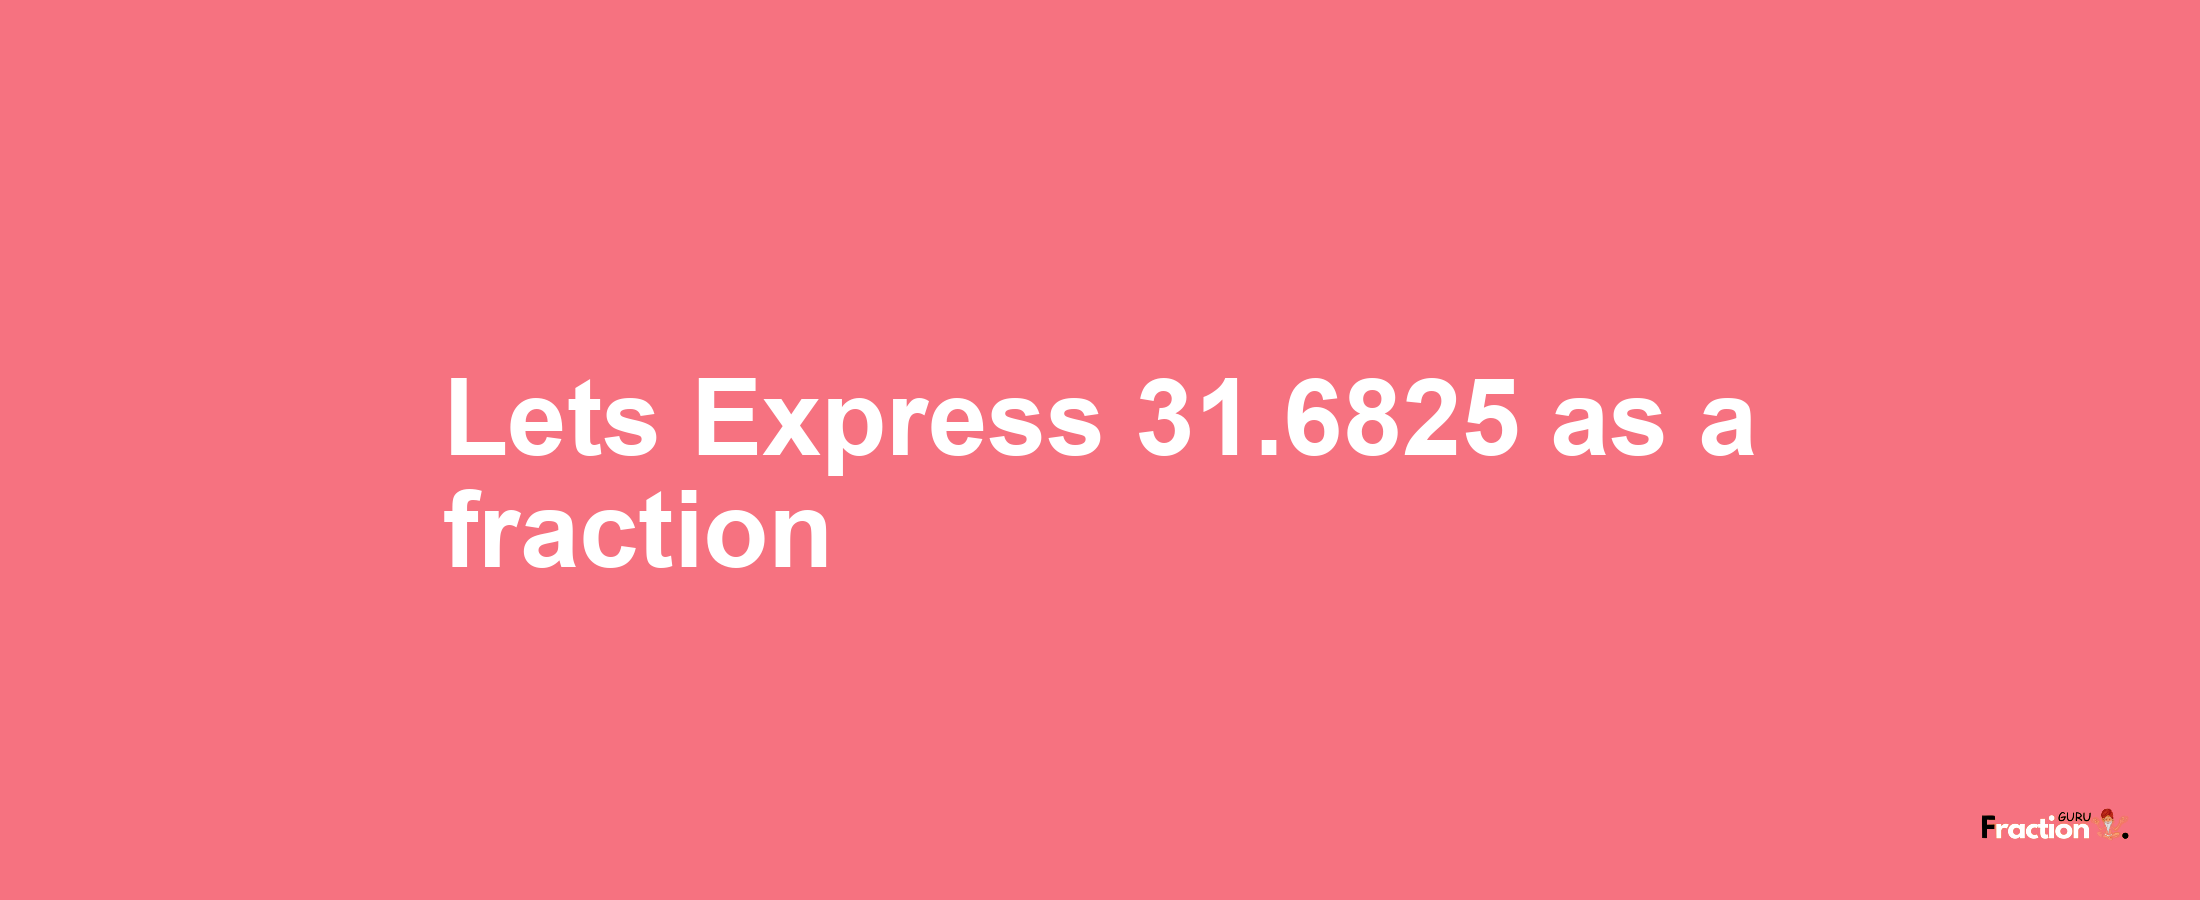 Lets Express 31.6825 as afraction